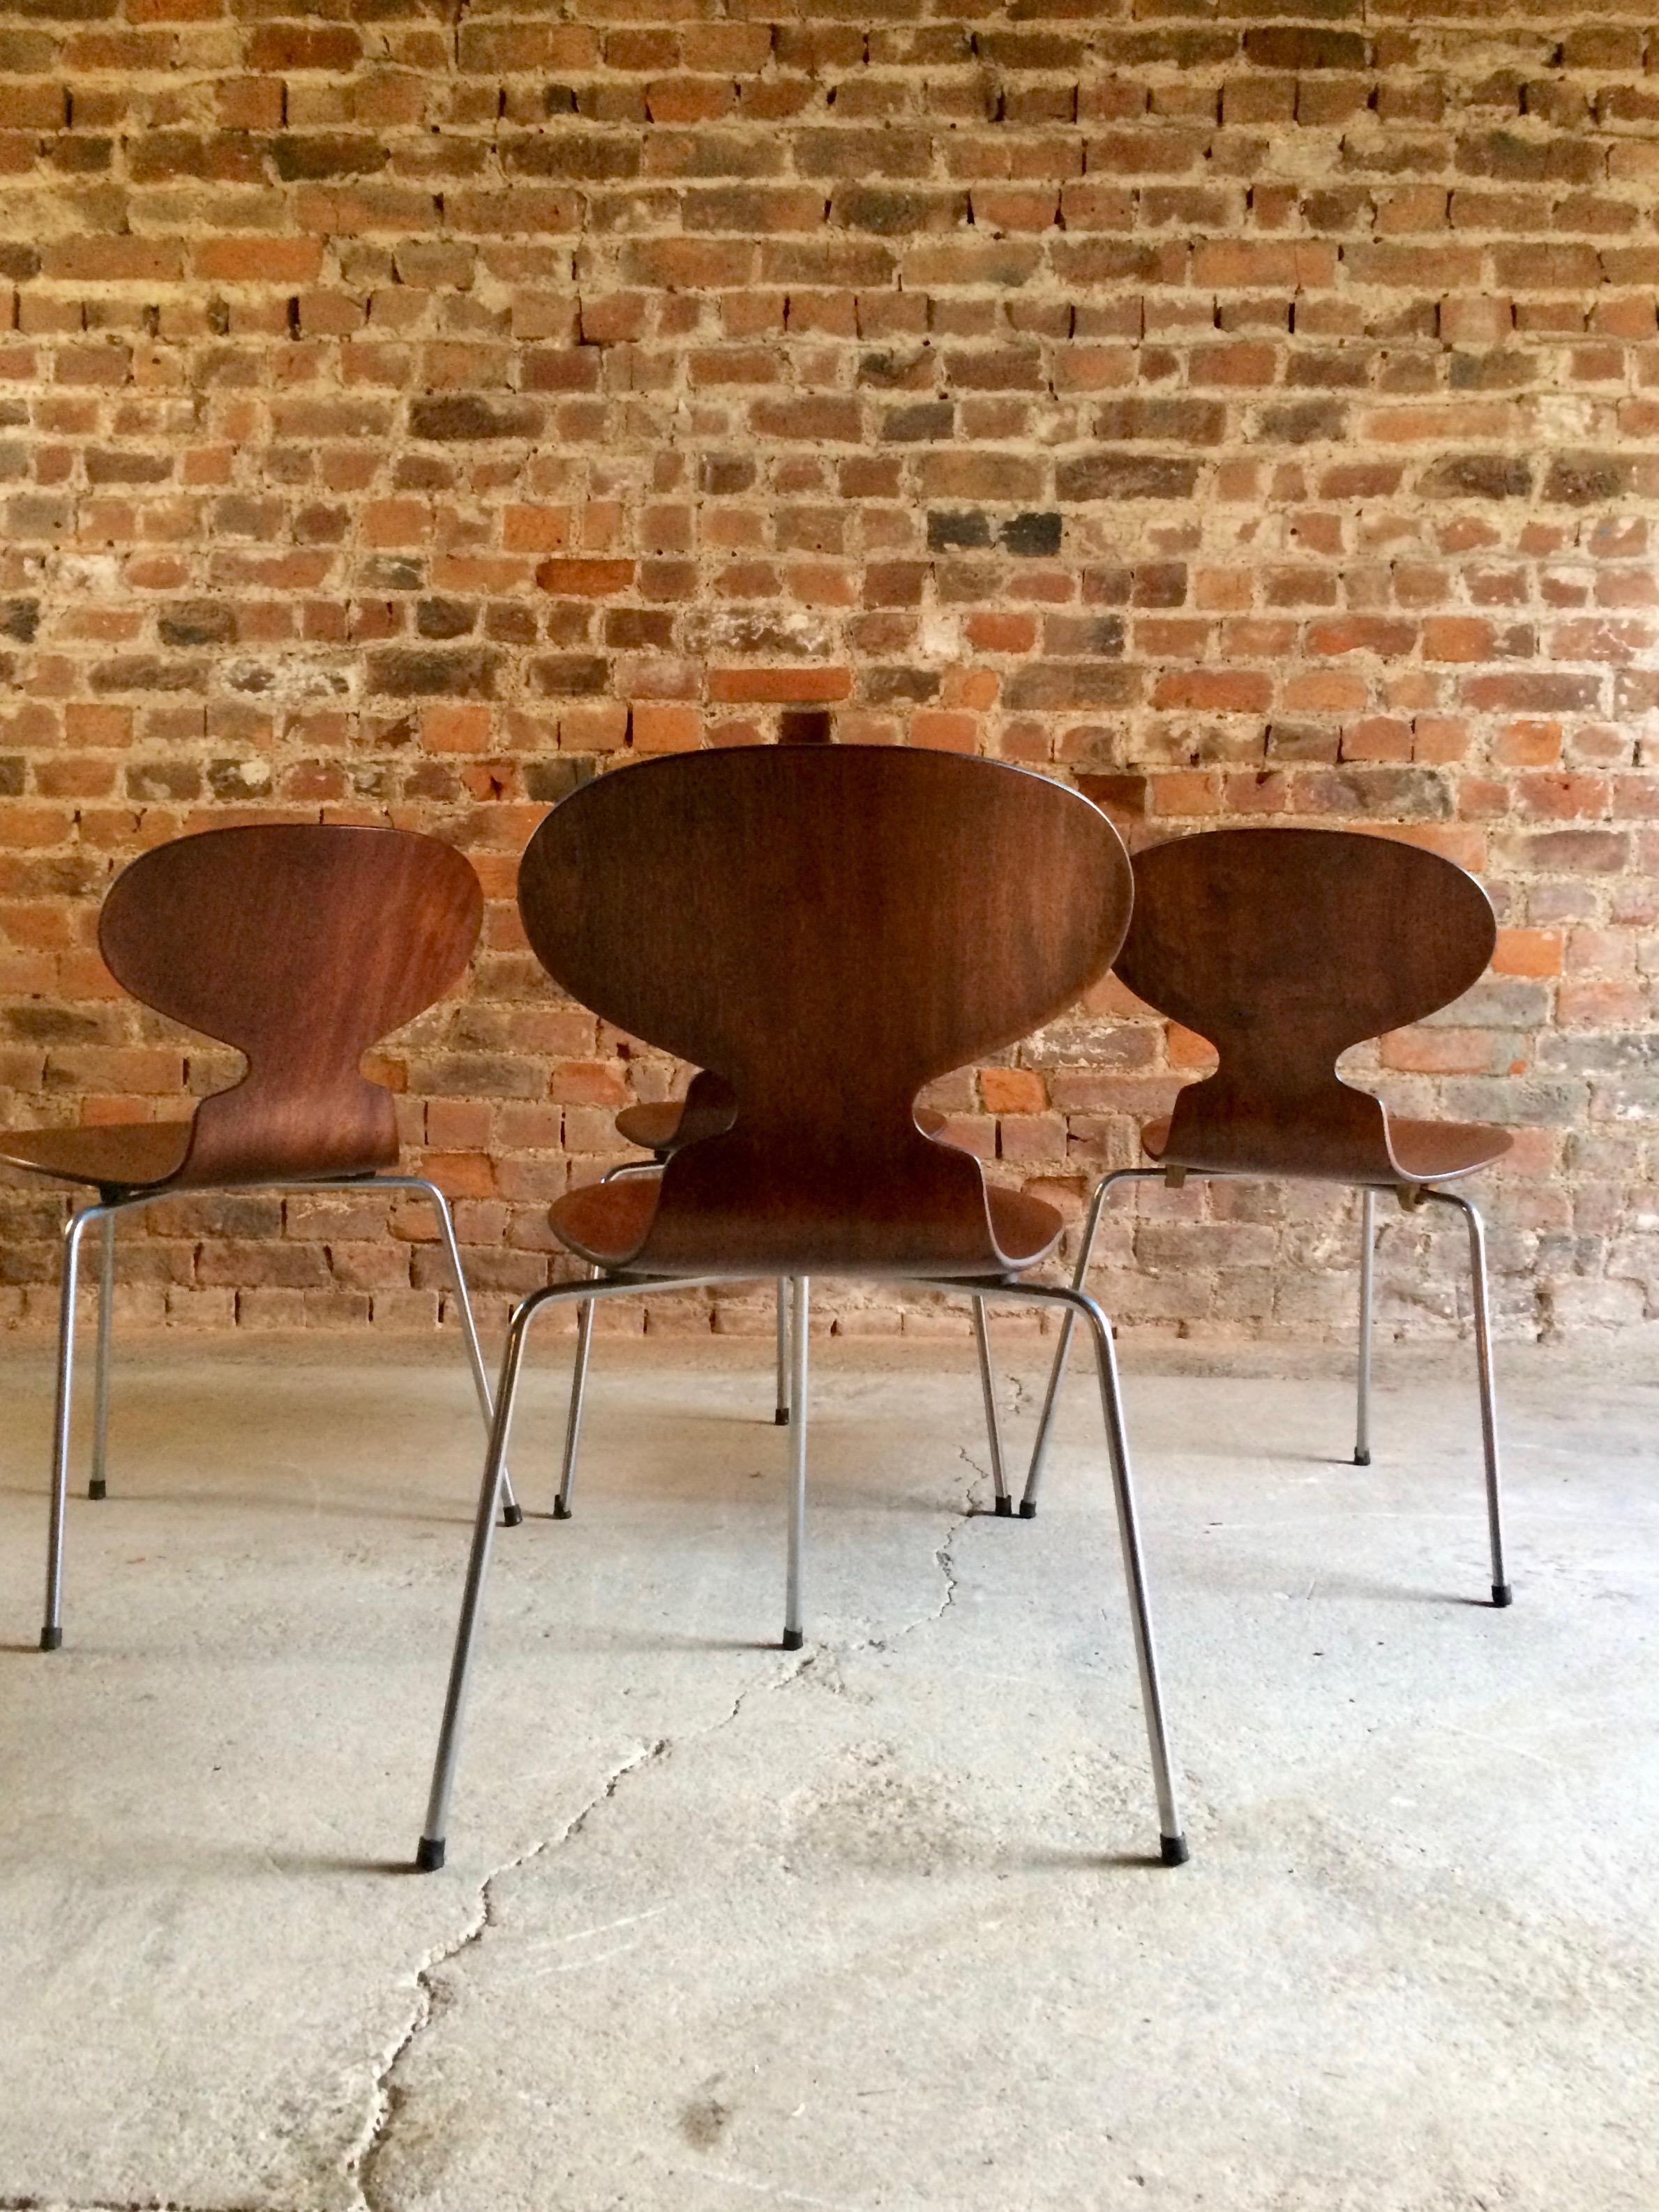 Plywood Arne Jacobsen Table and Four Ant Chairs Danish 1950s Midcentury Fritz Hansen